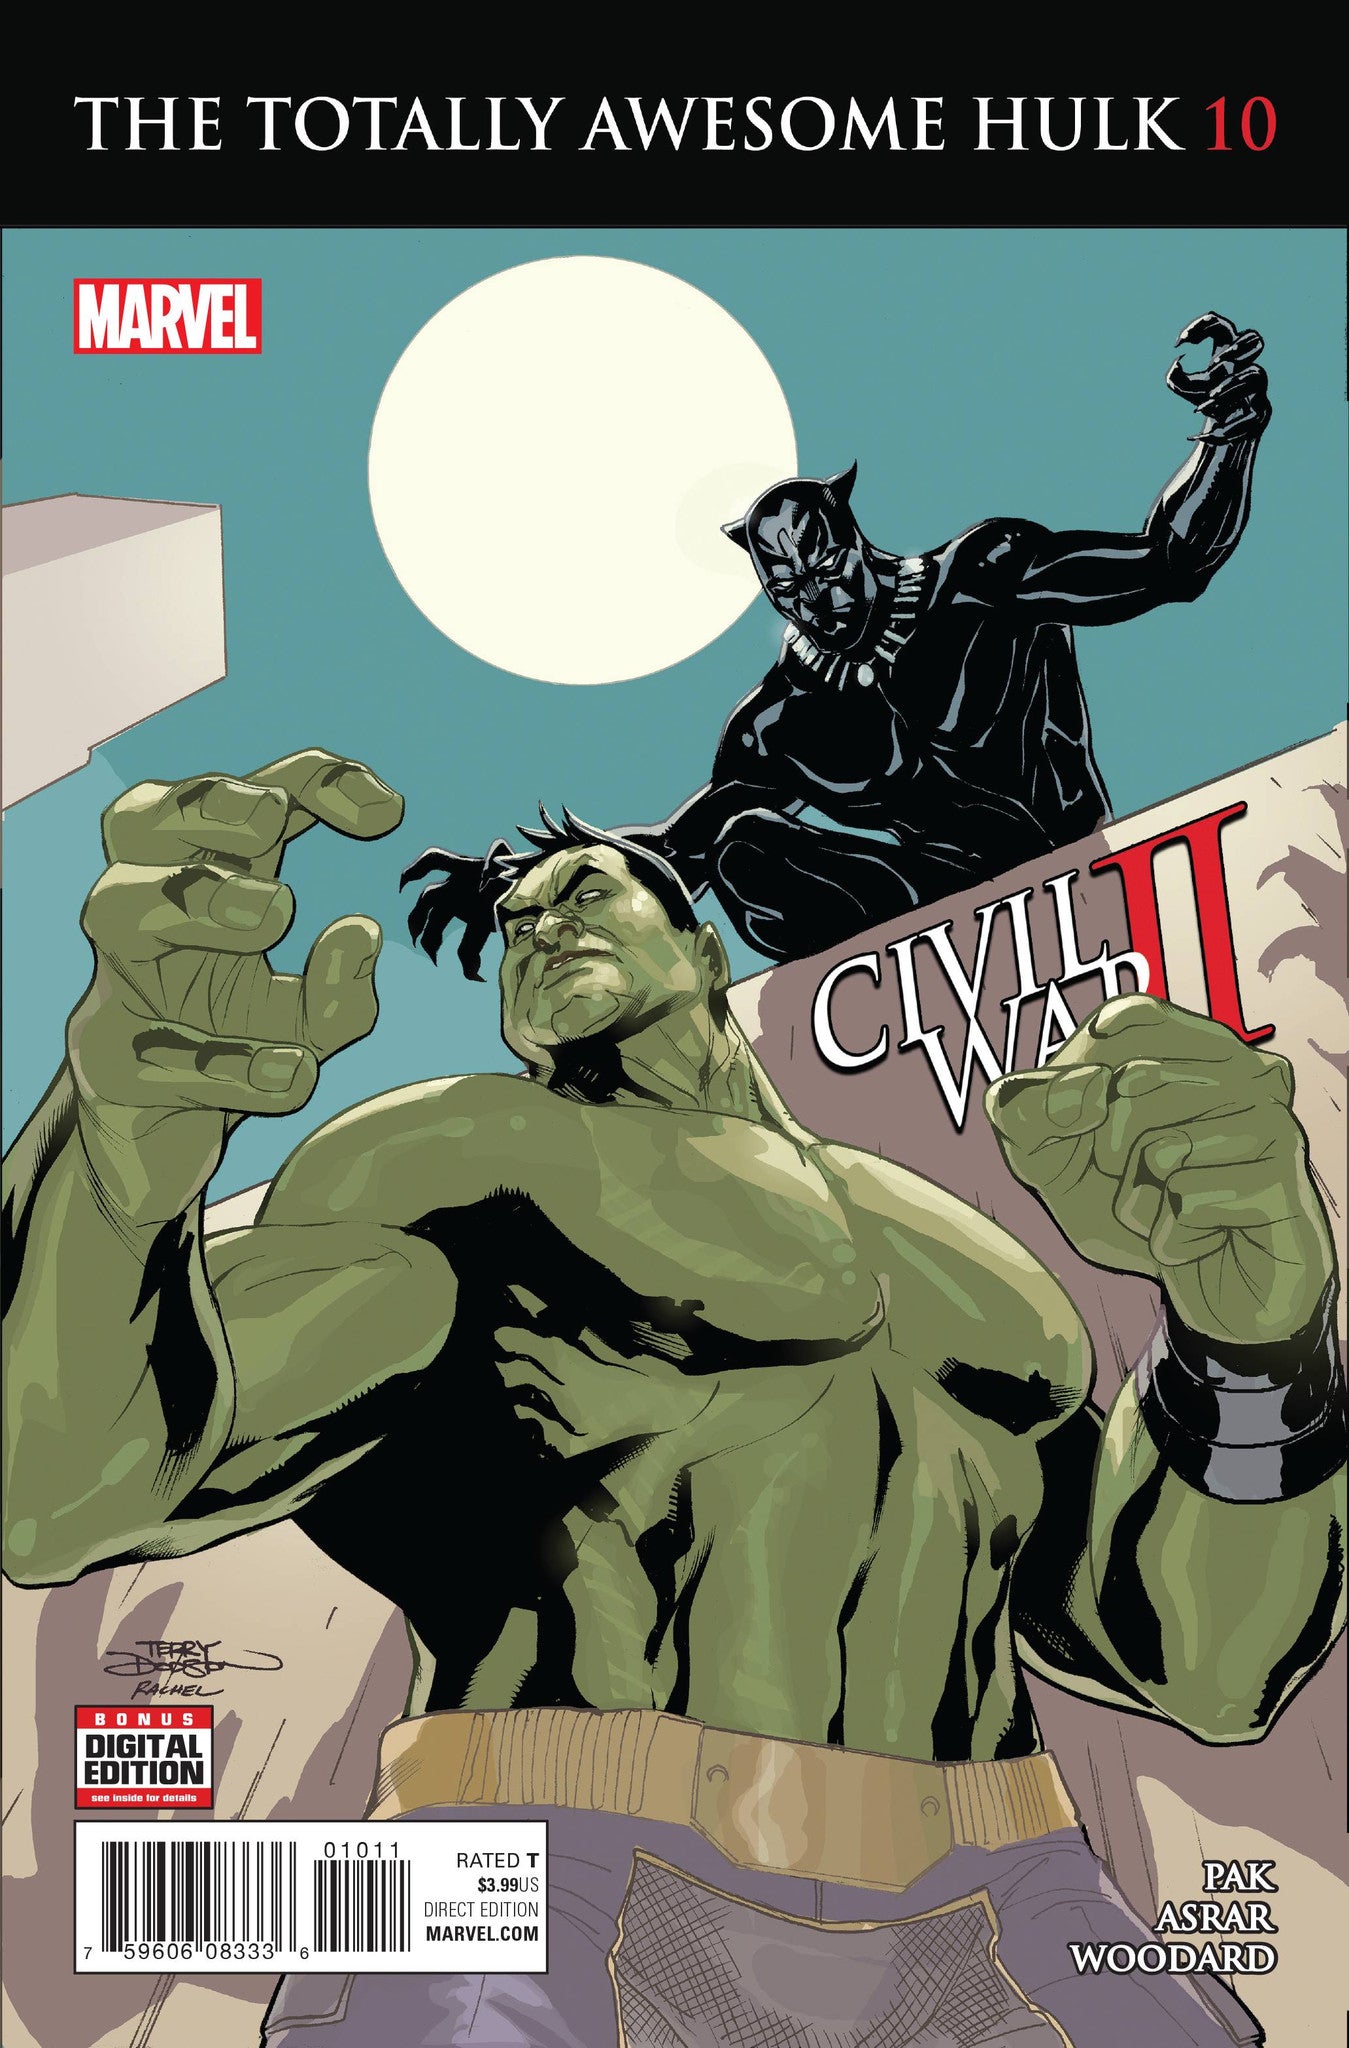 TOTALLY AWESOME HULK #10 CW2 COVER